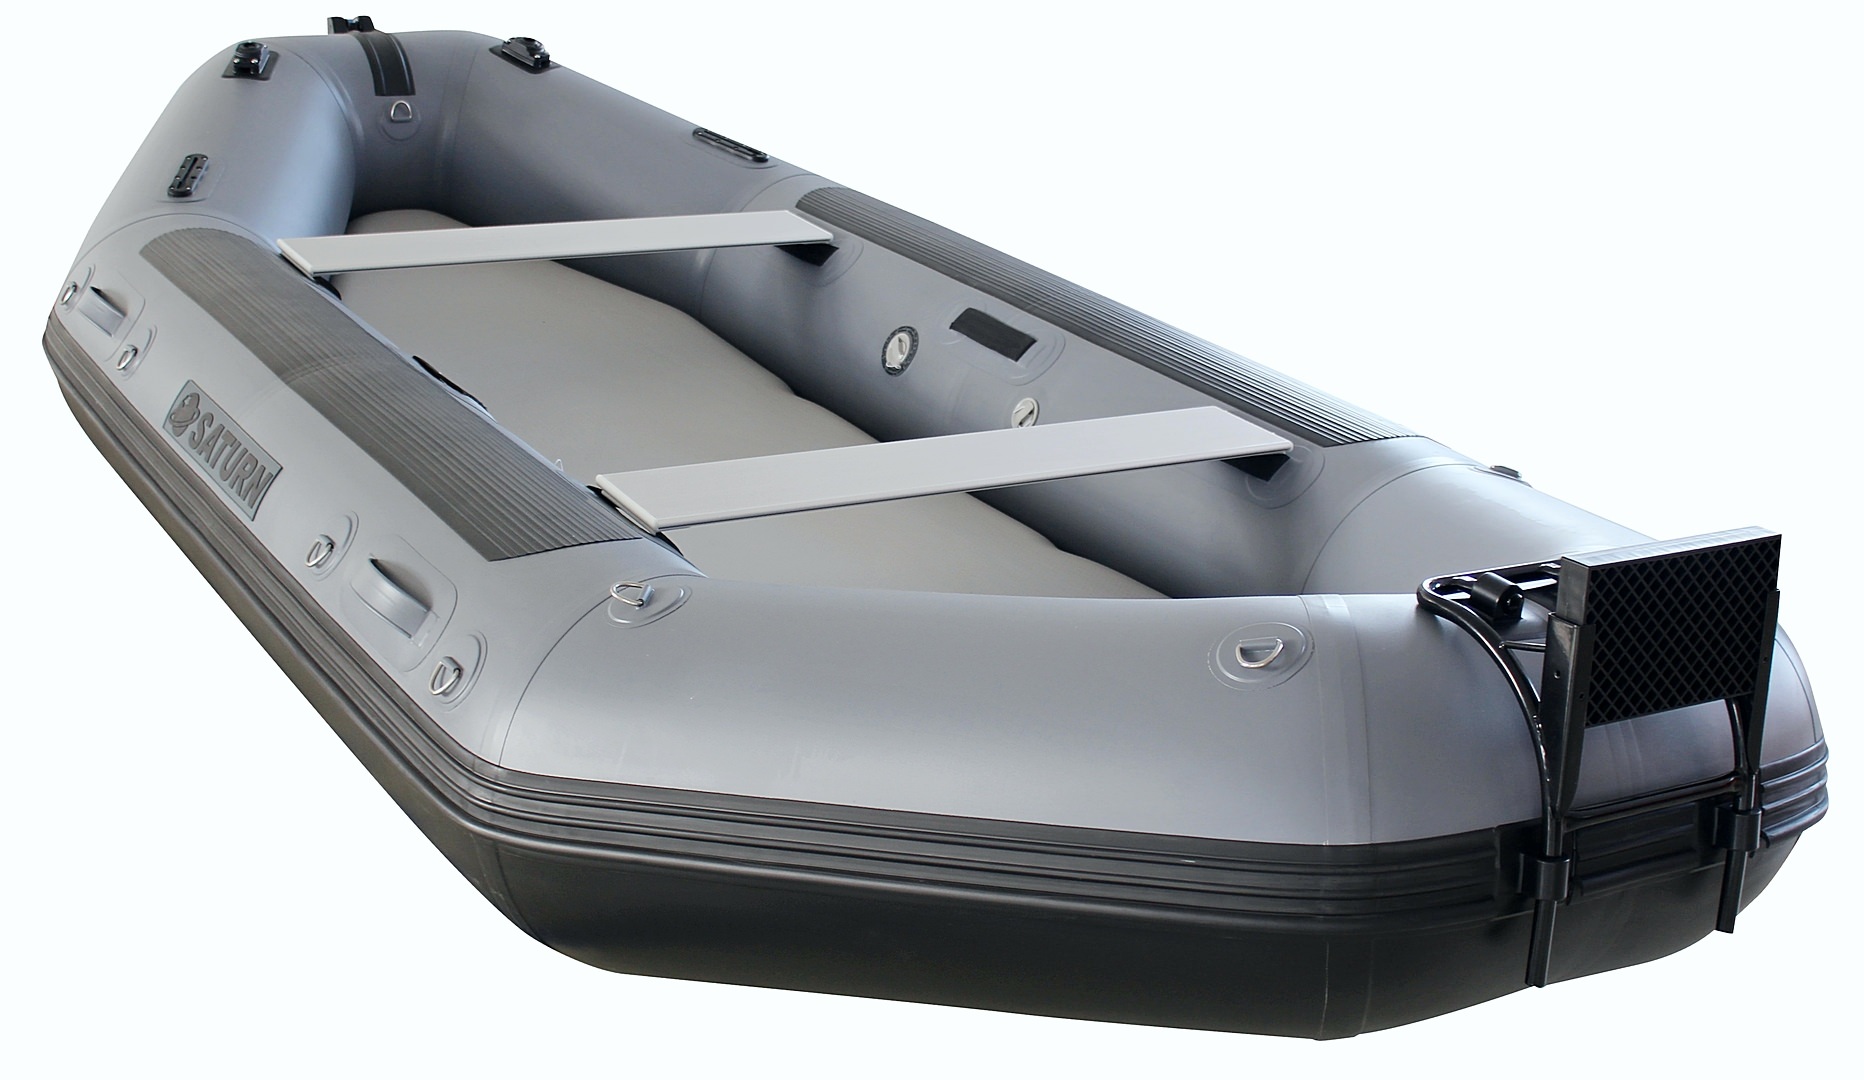 12.5' Commercial Grade Saturn Inflatable Fly Fishing Drift River Raft.